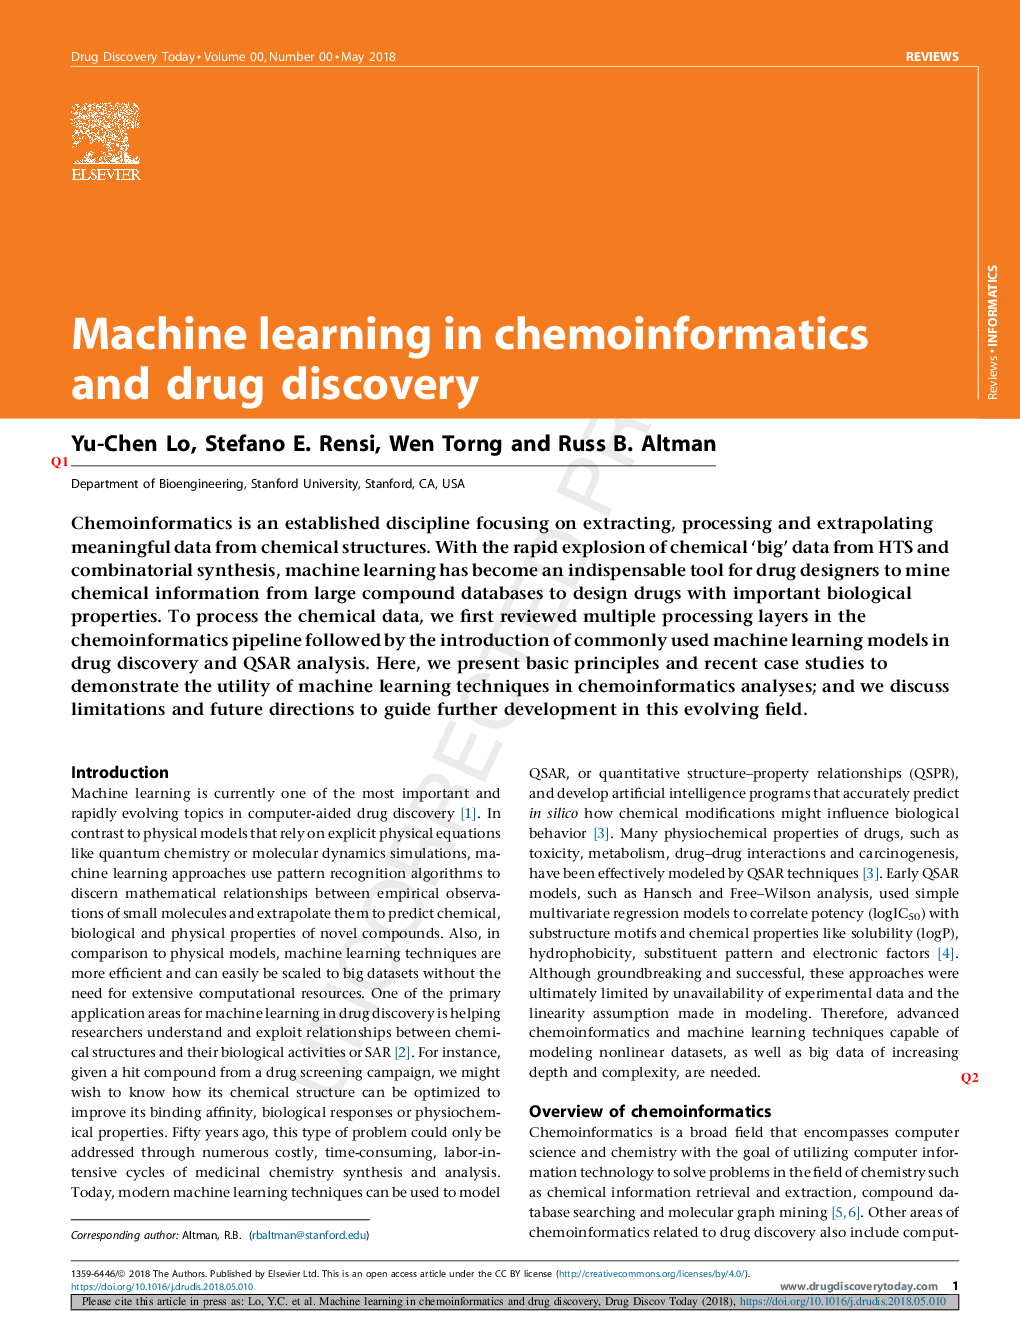 Machine learning in chemoinformatics and drug discovery